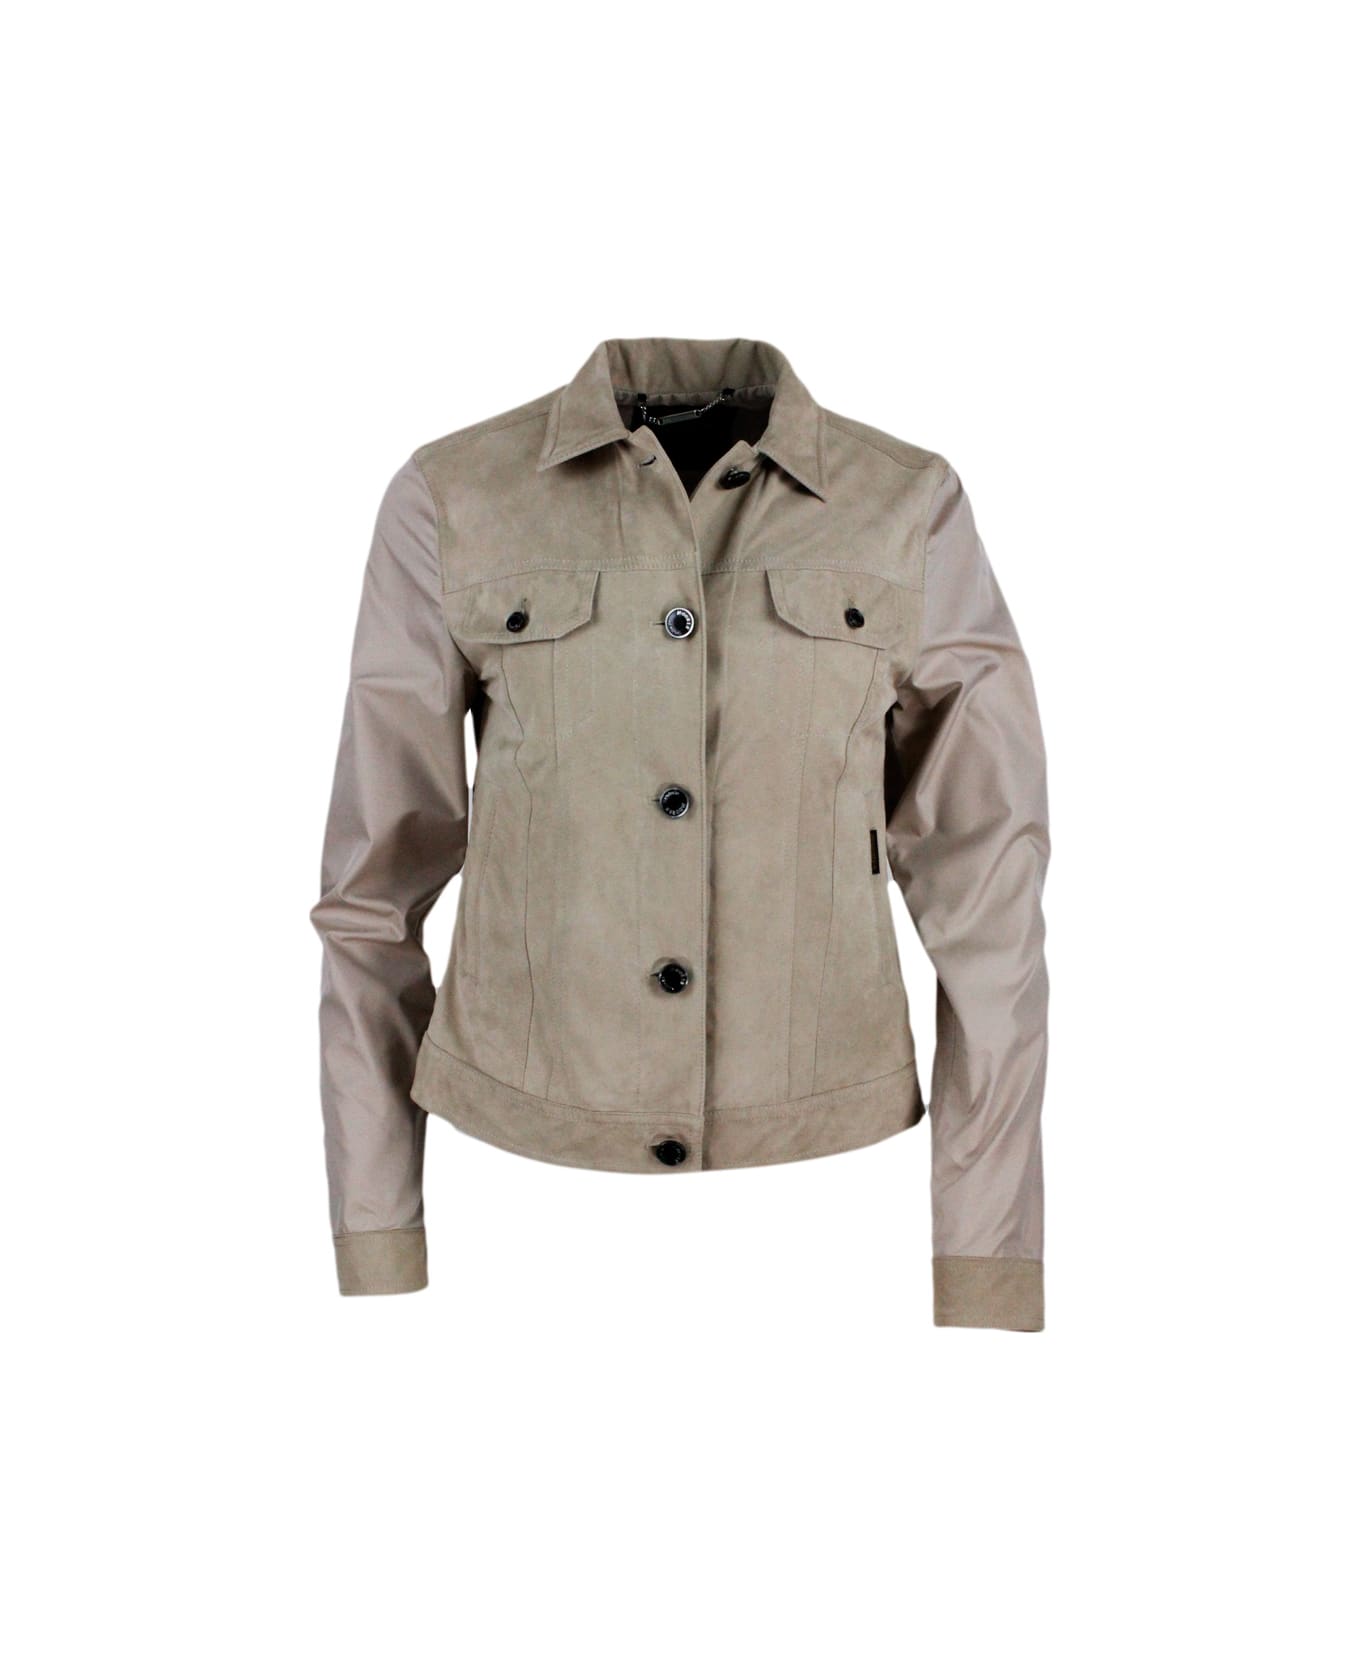 Moorer Windproof Lightweight Nylon Jacket With Soft Suede Front With Chest Pockets - Beige